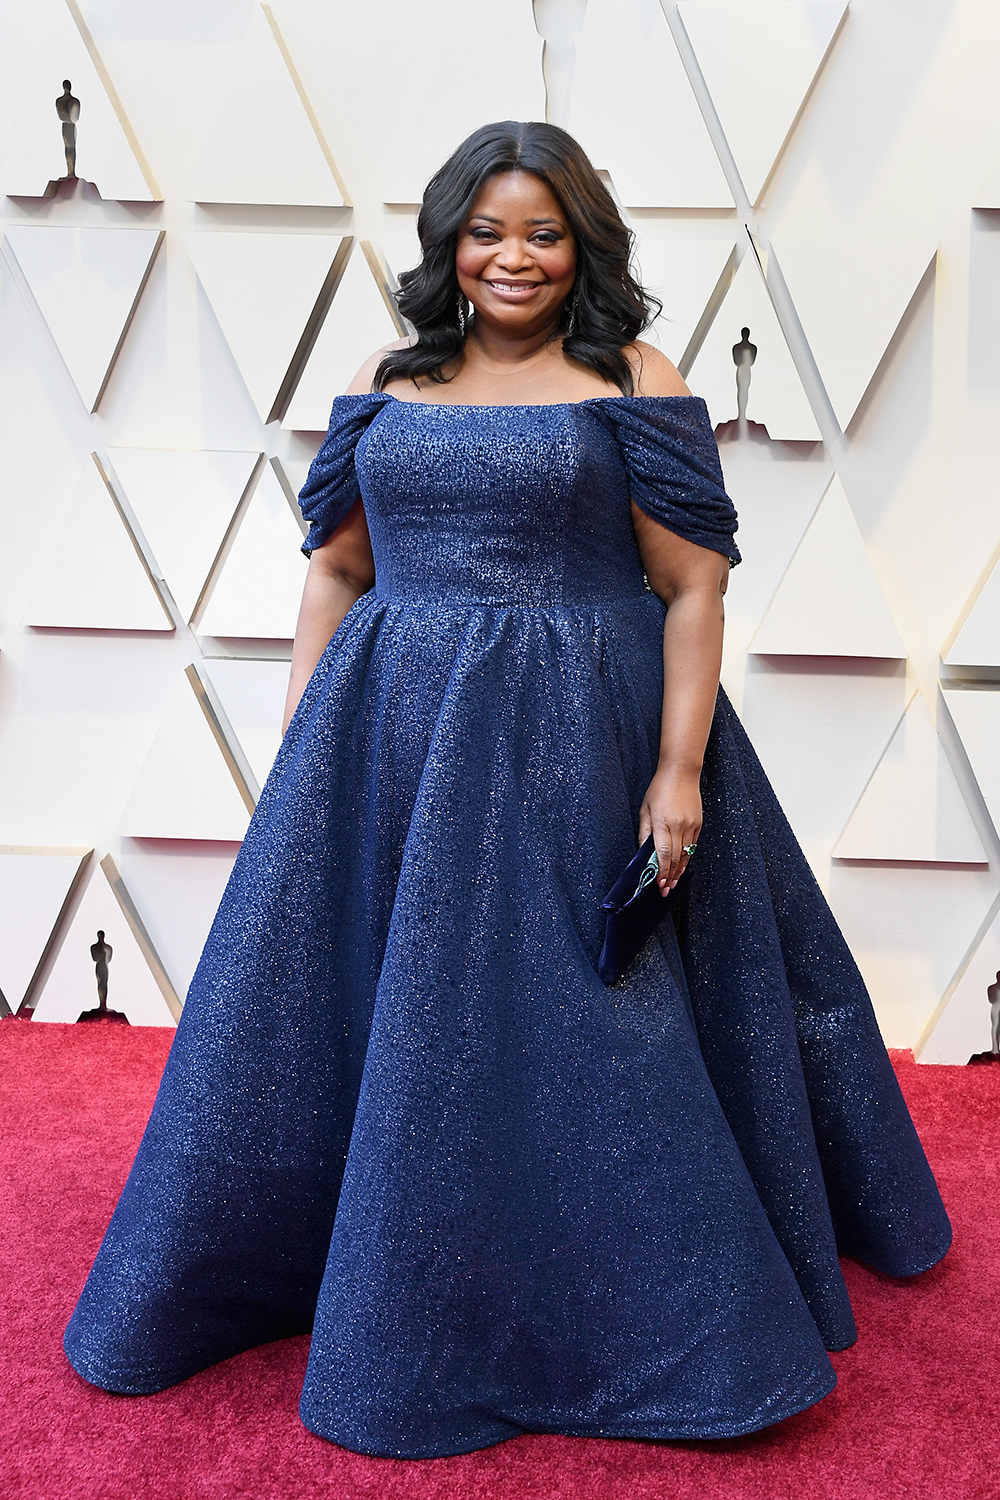 HOLLYWOOD, CA - FEBRUARY 24: Octavia Spencer attends the 91st Annual Academy Awards at Hollywood and Highland on February 24, 2019 in Hollywood, California. (Photo by Steve Granitz/WireImage)